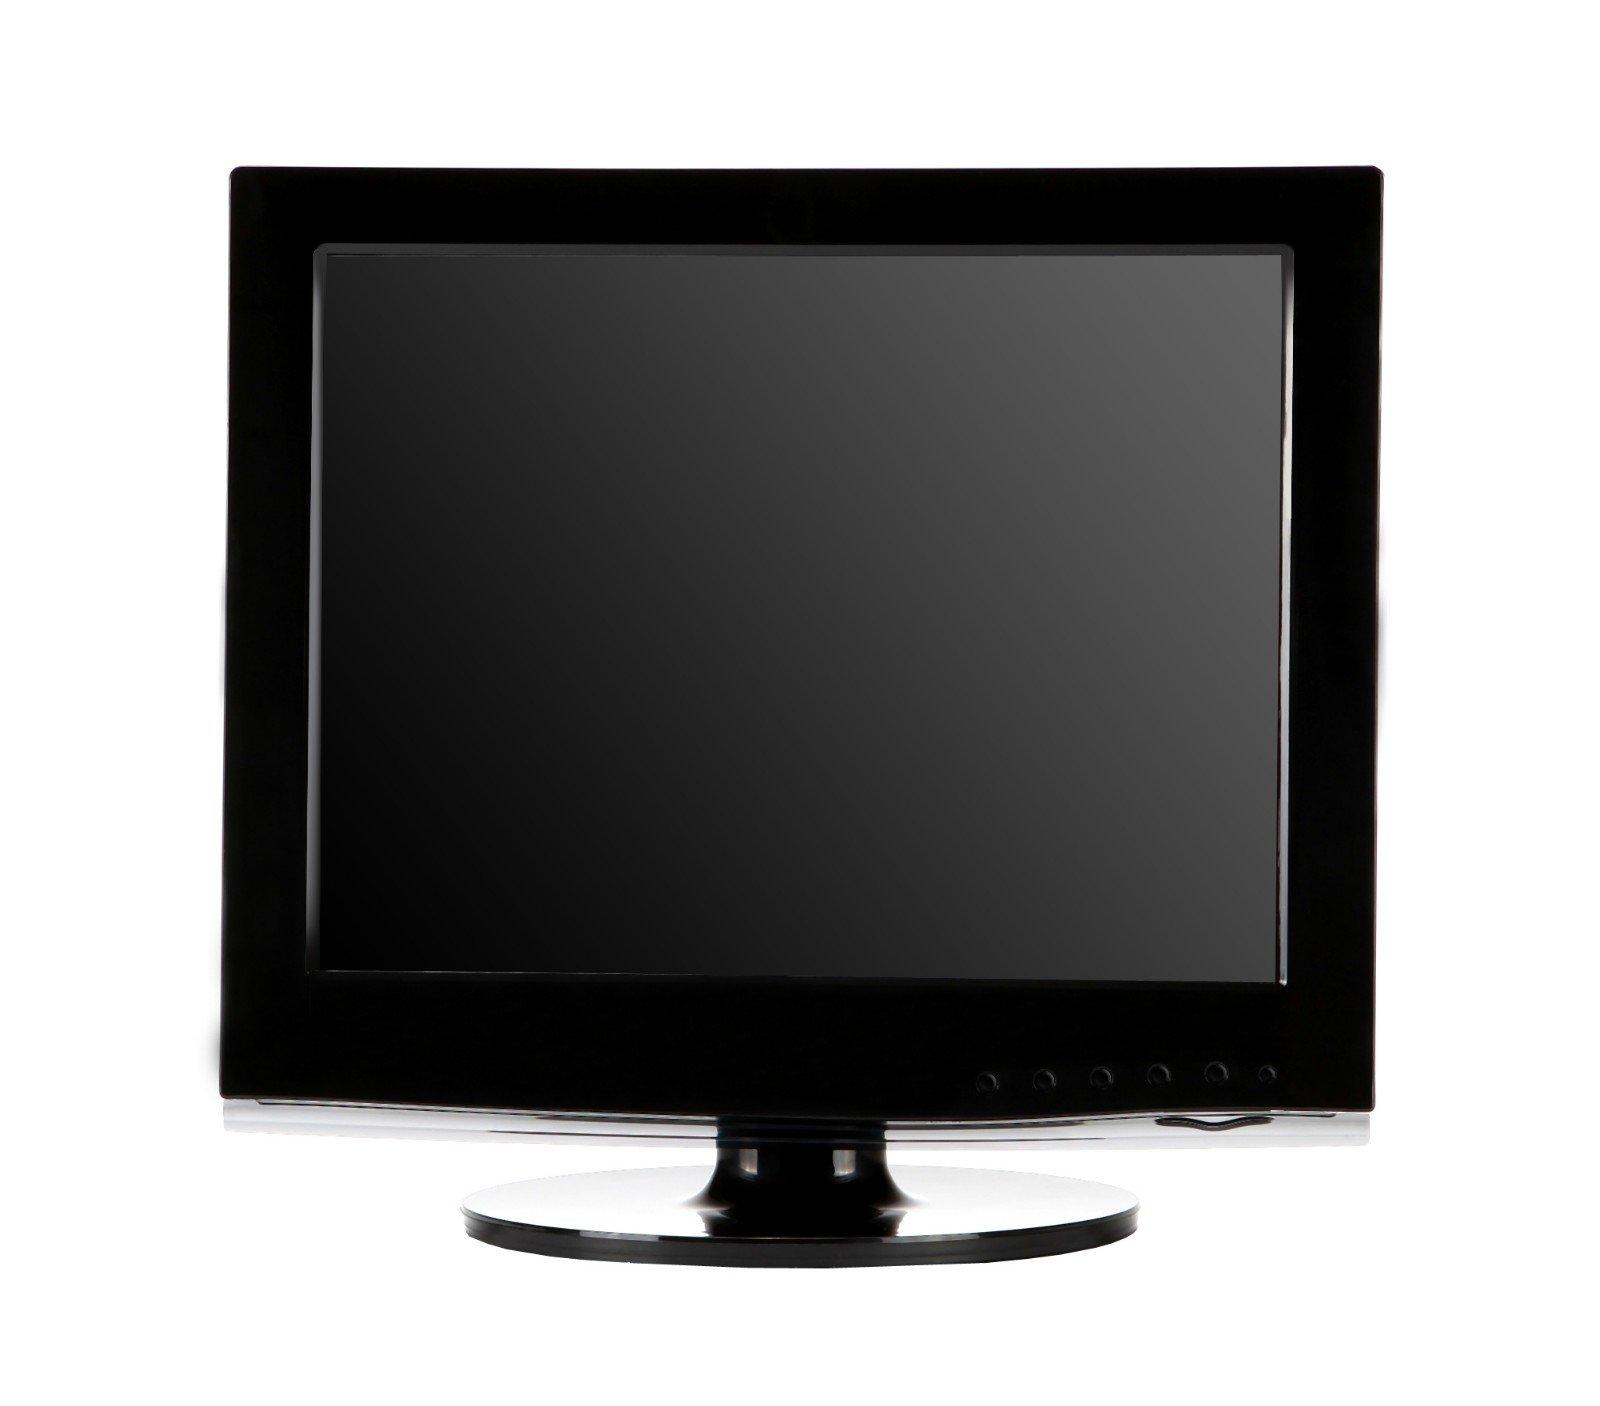 Xinyao LCD 15 lcd monitor with hdmi output for lcd tv screen